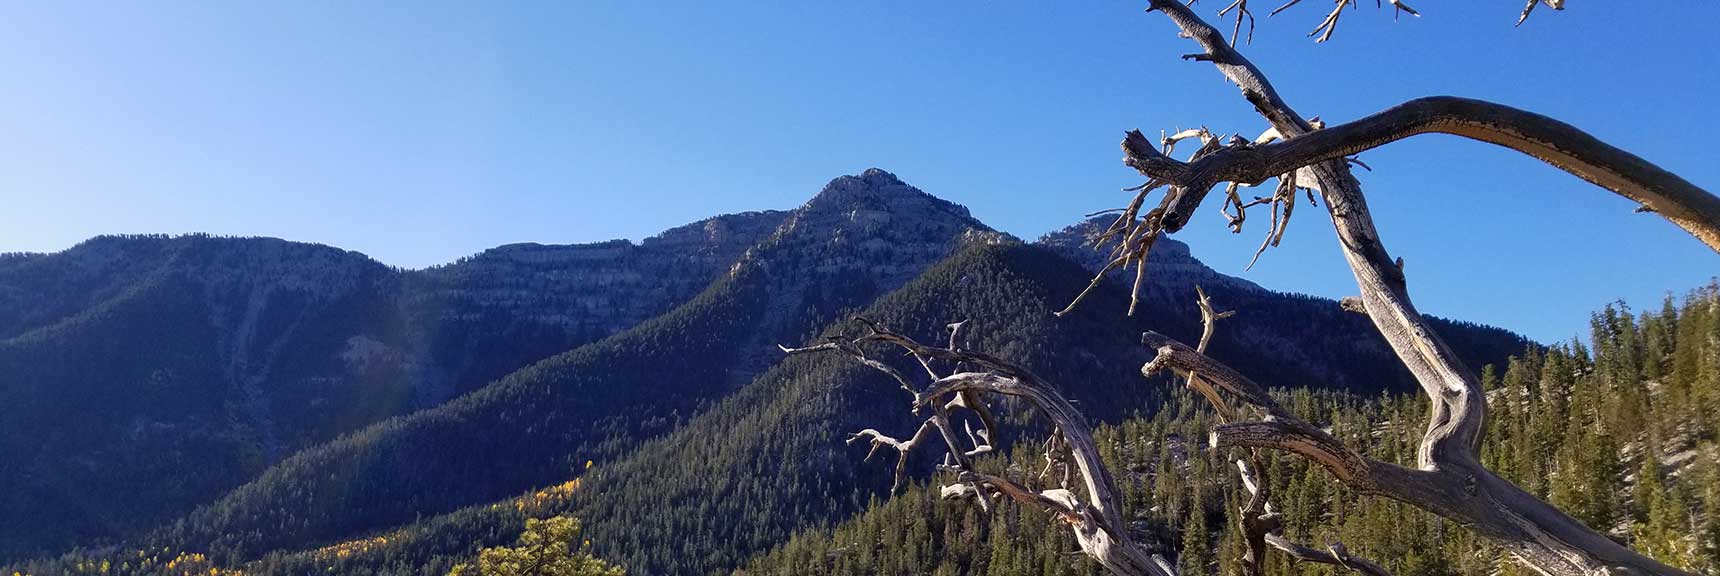 View of Lee Peak from the Bristlecone Pine Trail in Lee Canyon, Mt. Charleston Wilderness, Nevada